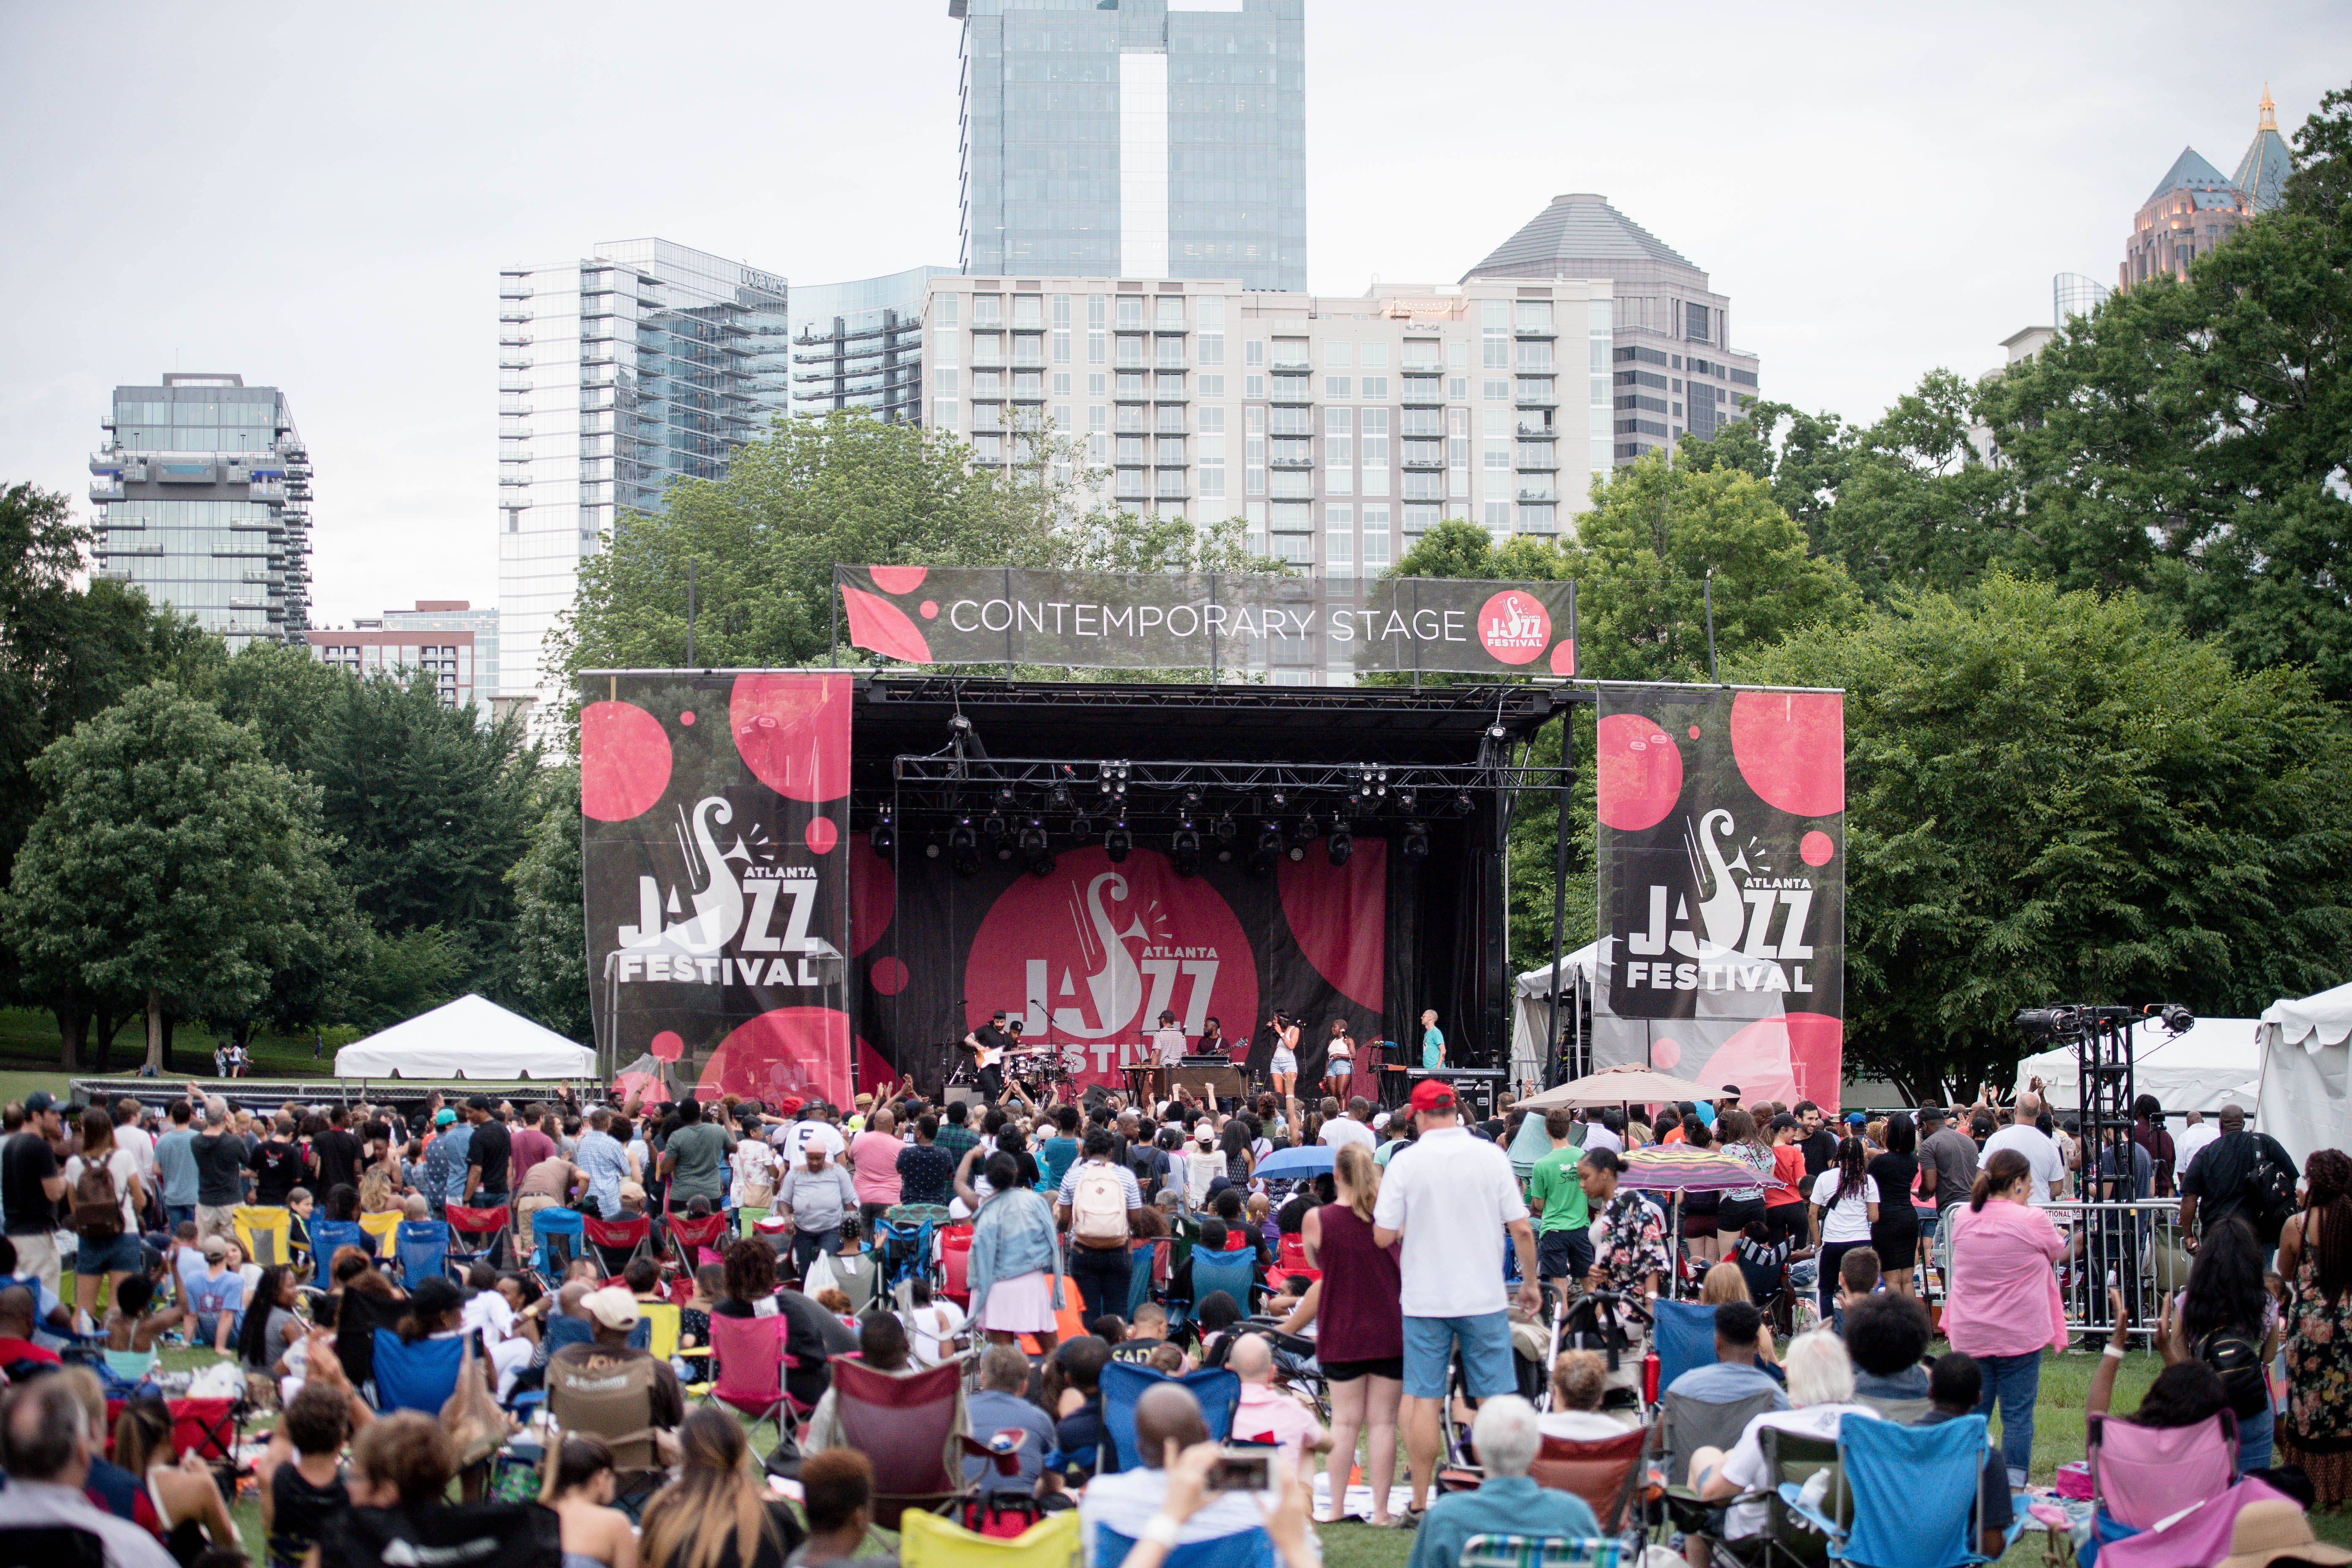 People attend an outdoor jazz festival in a verdant park with the Atlanta skyline in the background